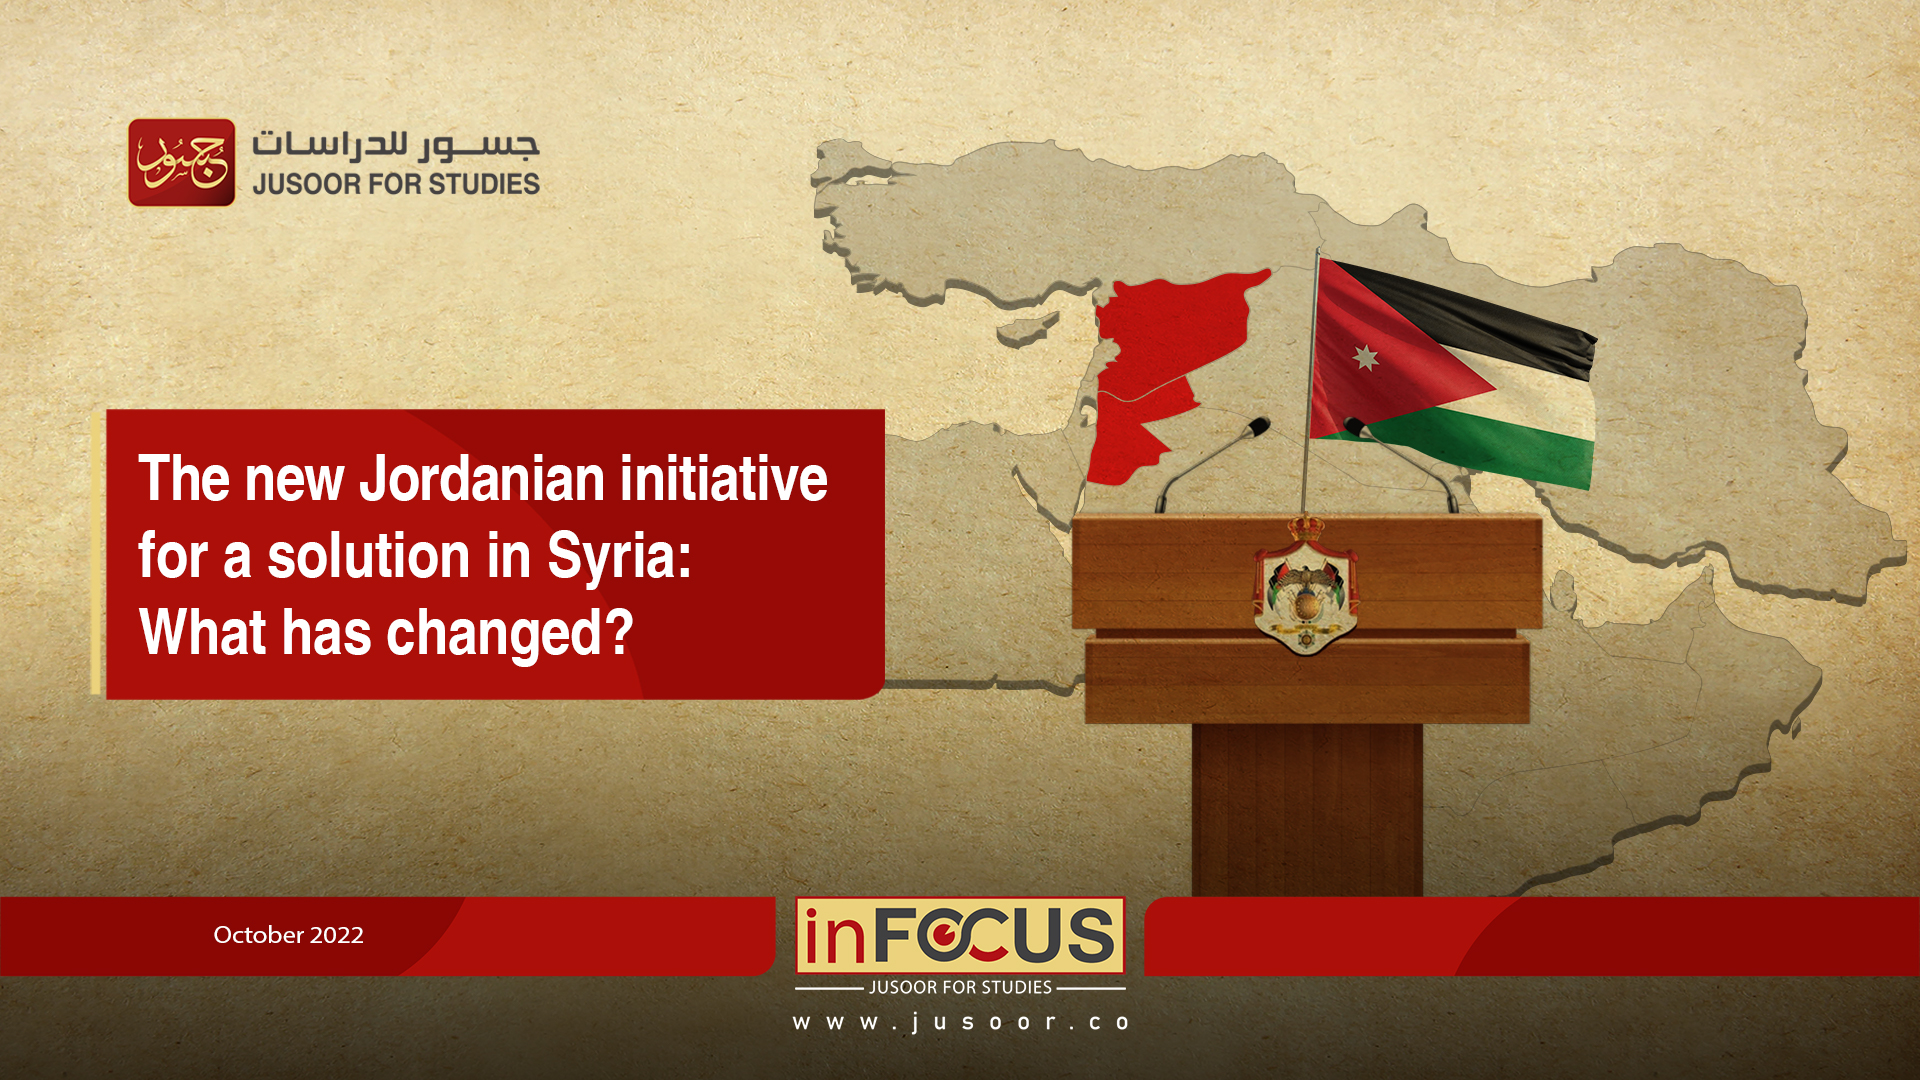 The new Jordanian initiative for a solution in Syria: What has changed